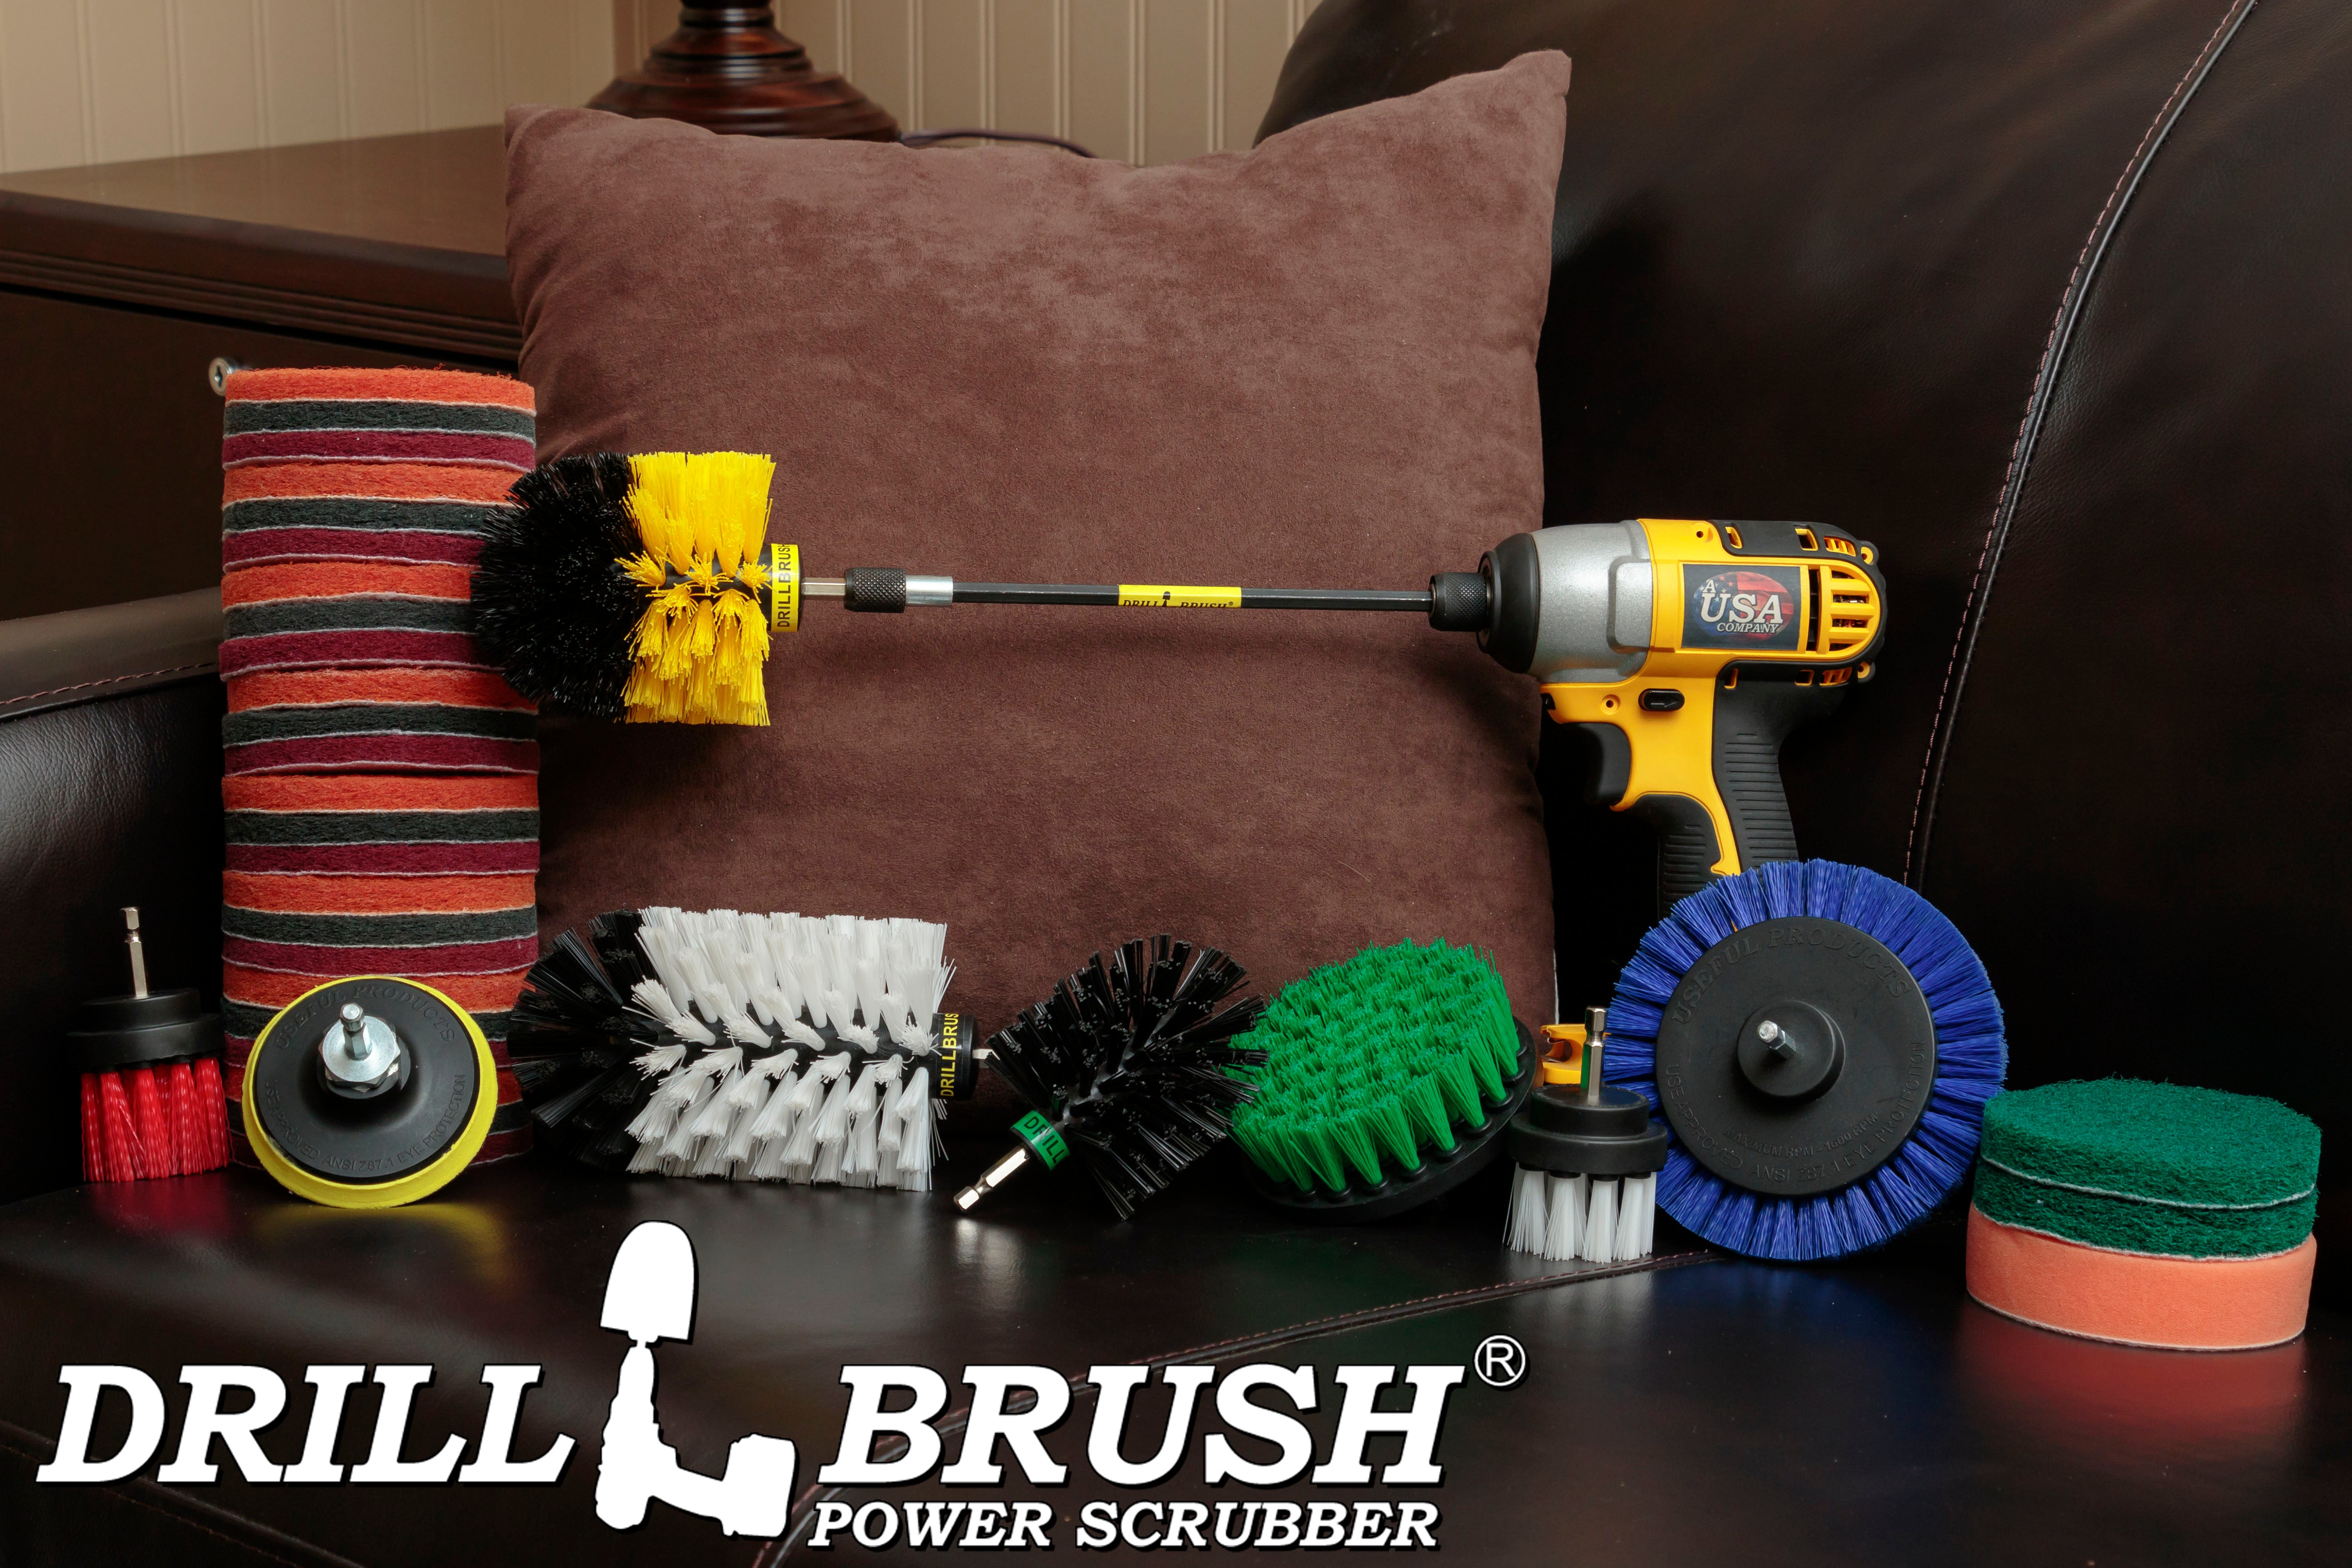 Kitchen Accessories - Cleaning Supplies - Drill Brush - Stove - Cooktop -  Griddle - Oven - Cast Iron Skillet - Spin Brush - Grout Cleaner - Mold